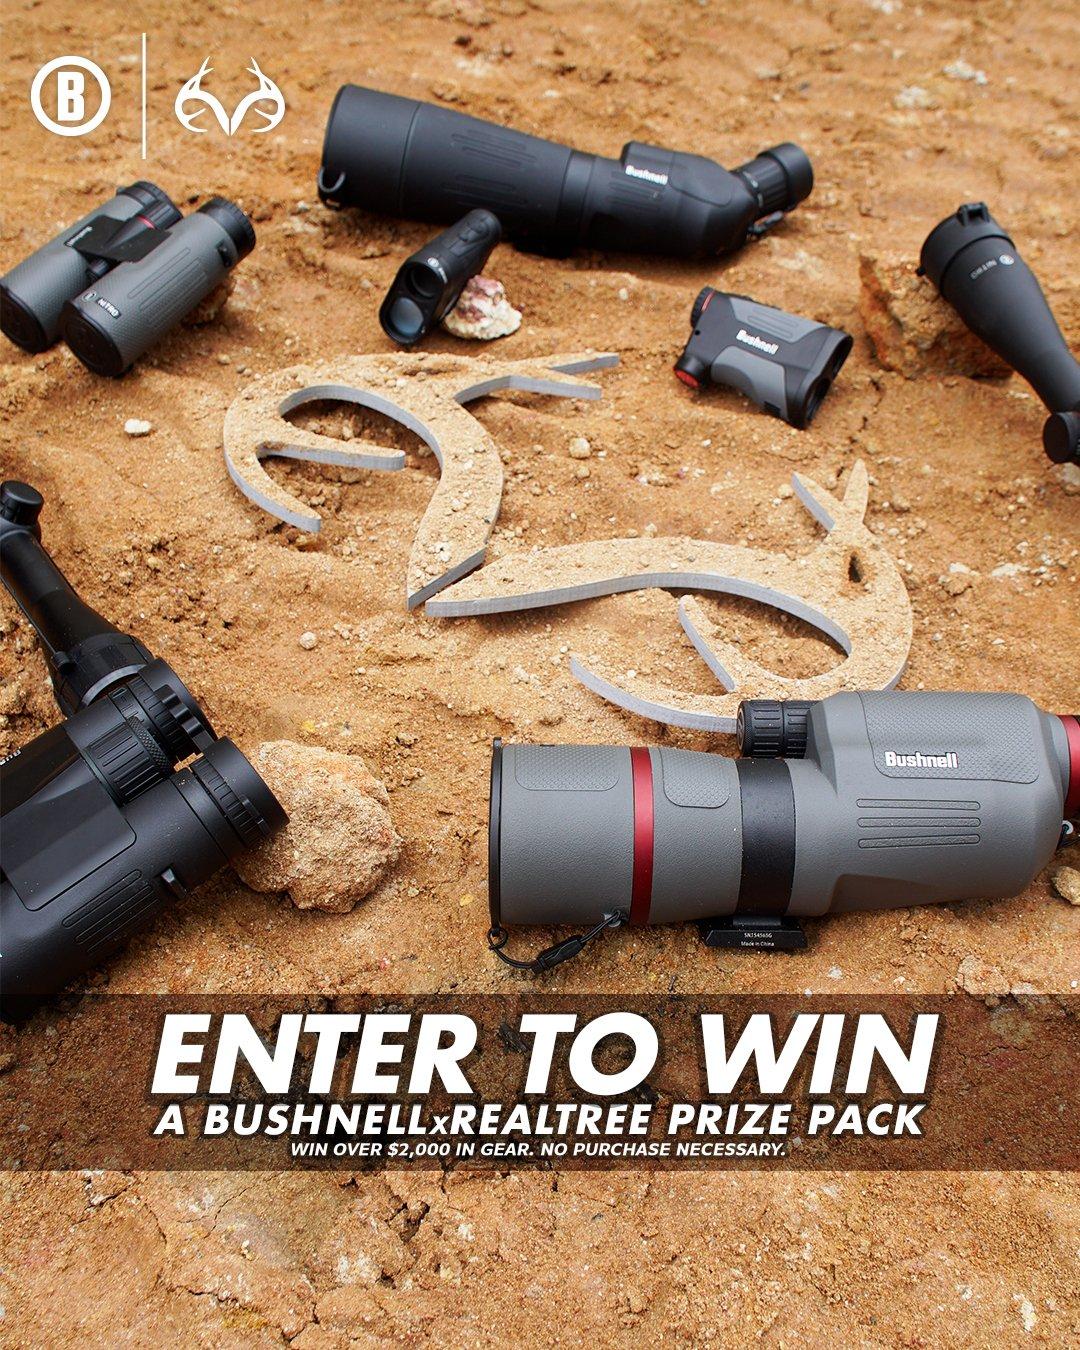 Enter before the deadline for a chance to win some incredible hunting gear. (Realtree photo)